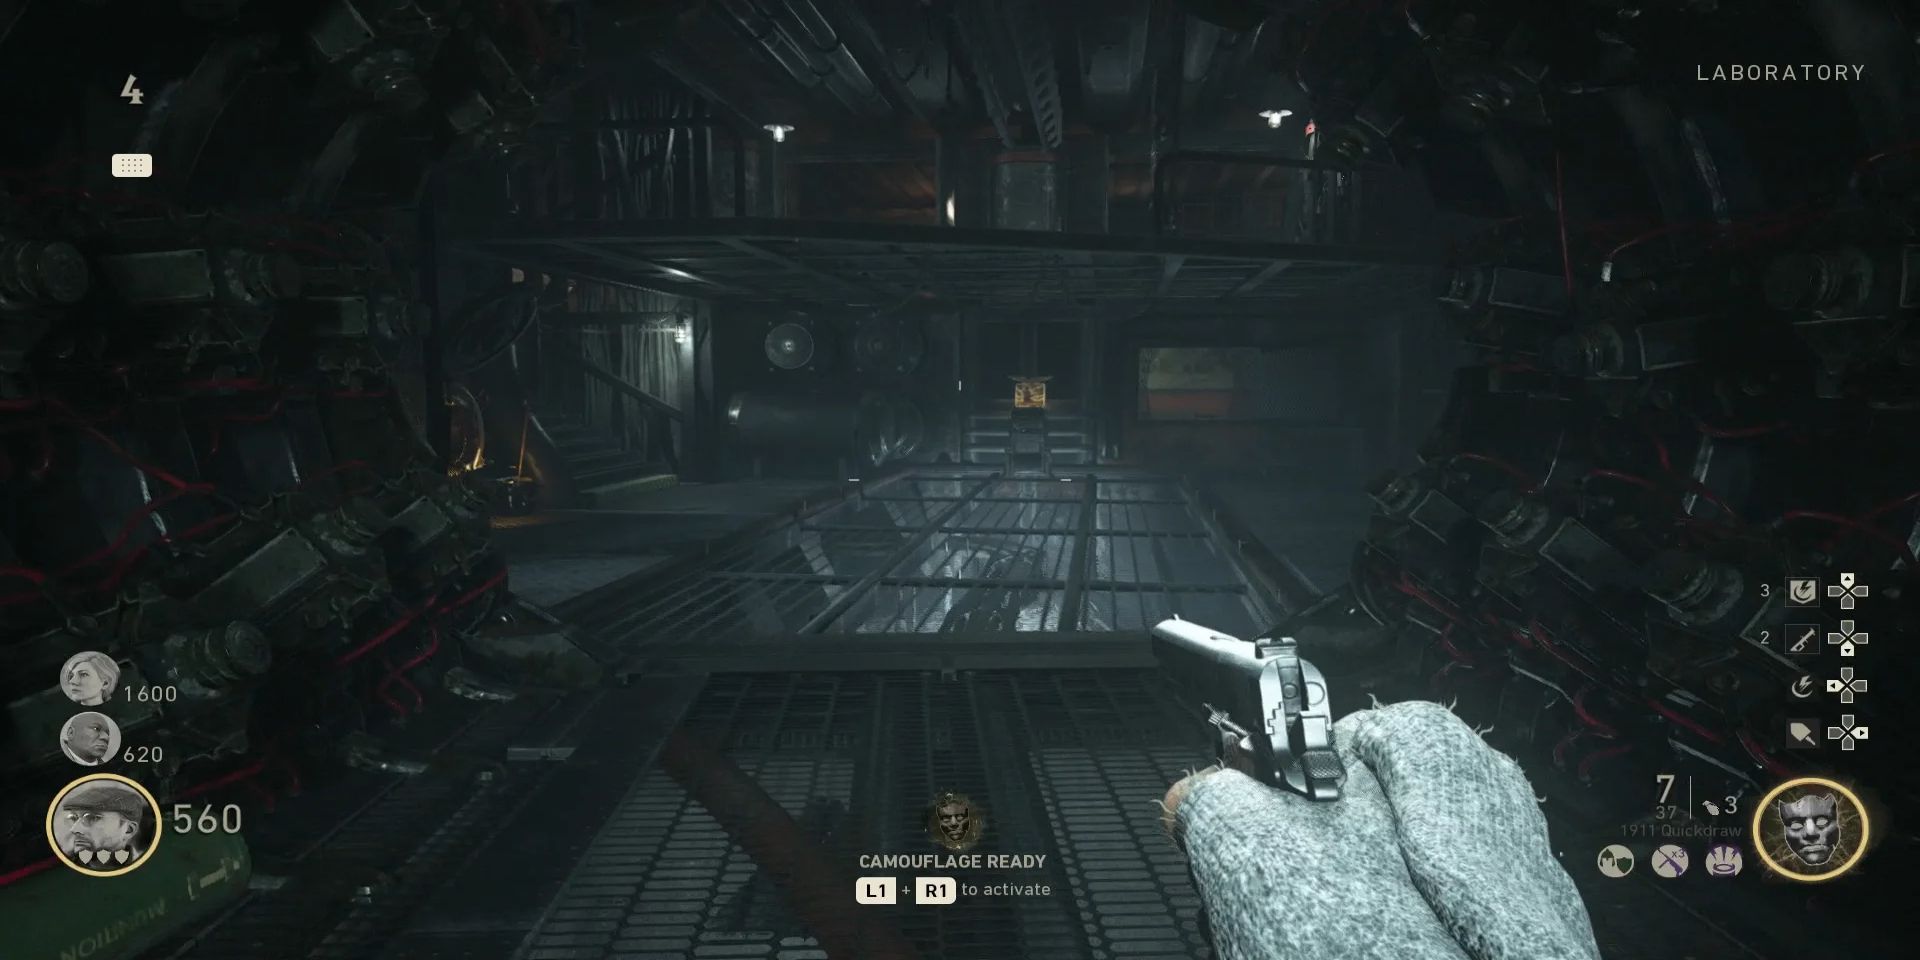 A screenshot from Call of Duty WWII's zombie mode showing the player inside the laboratory.